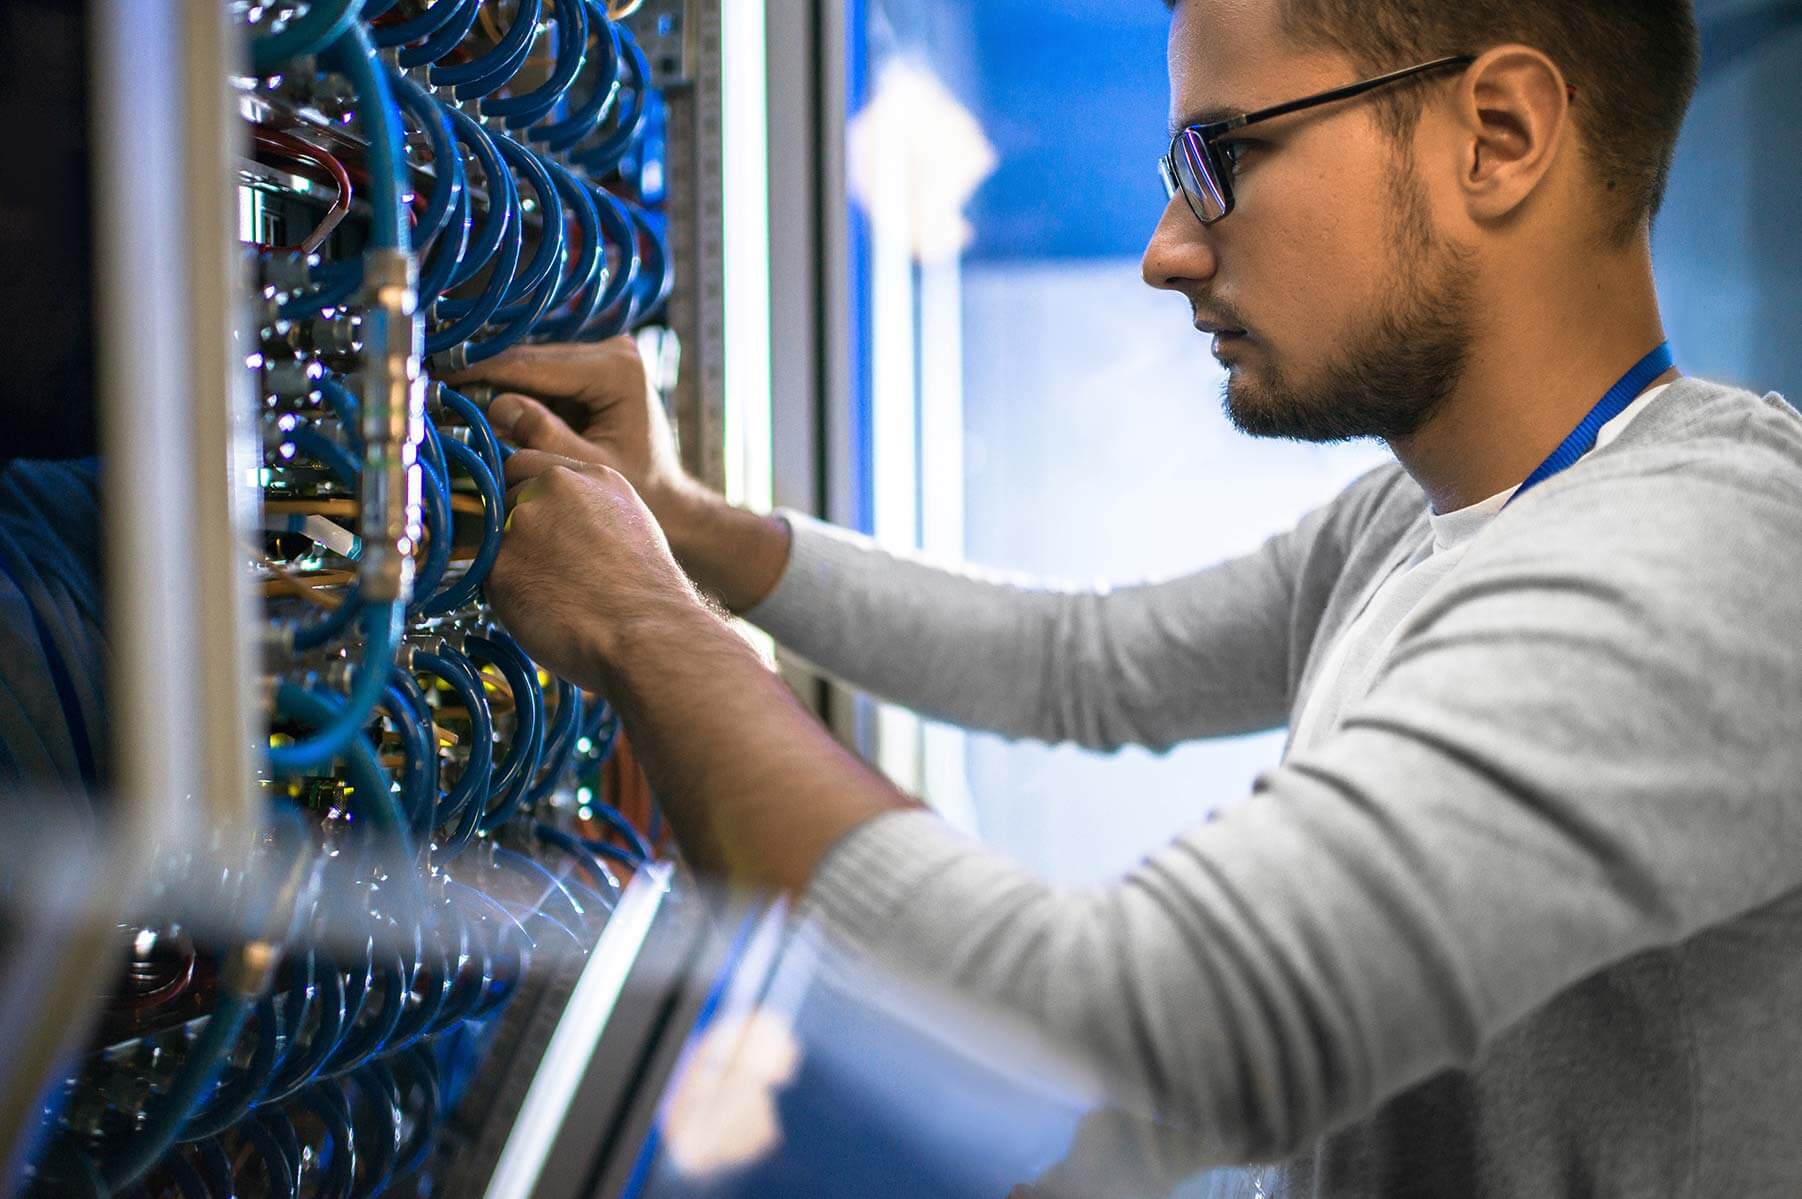 IT employee performing wiring maintenance in an IT closet.